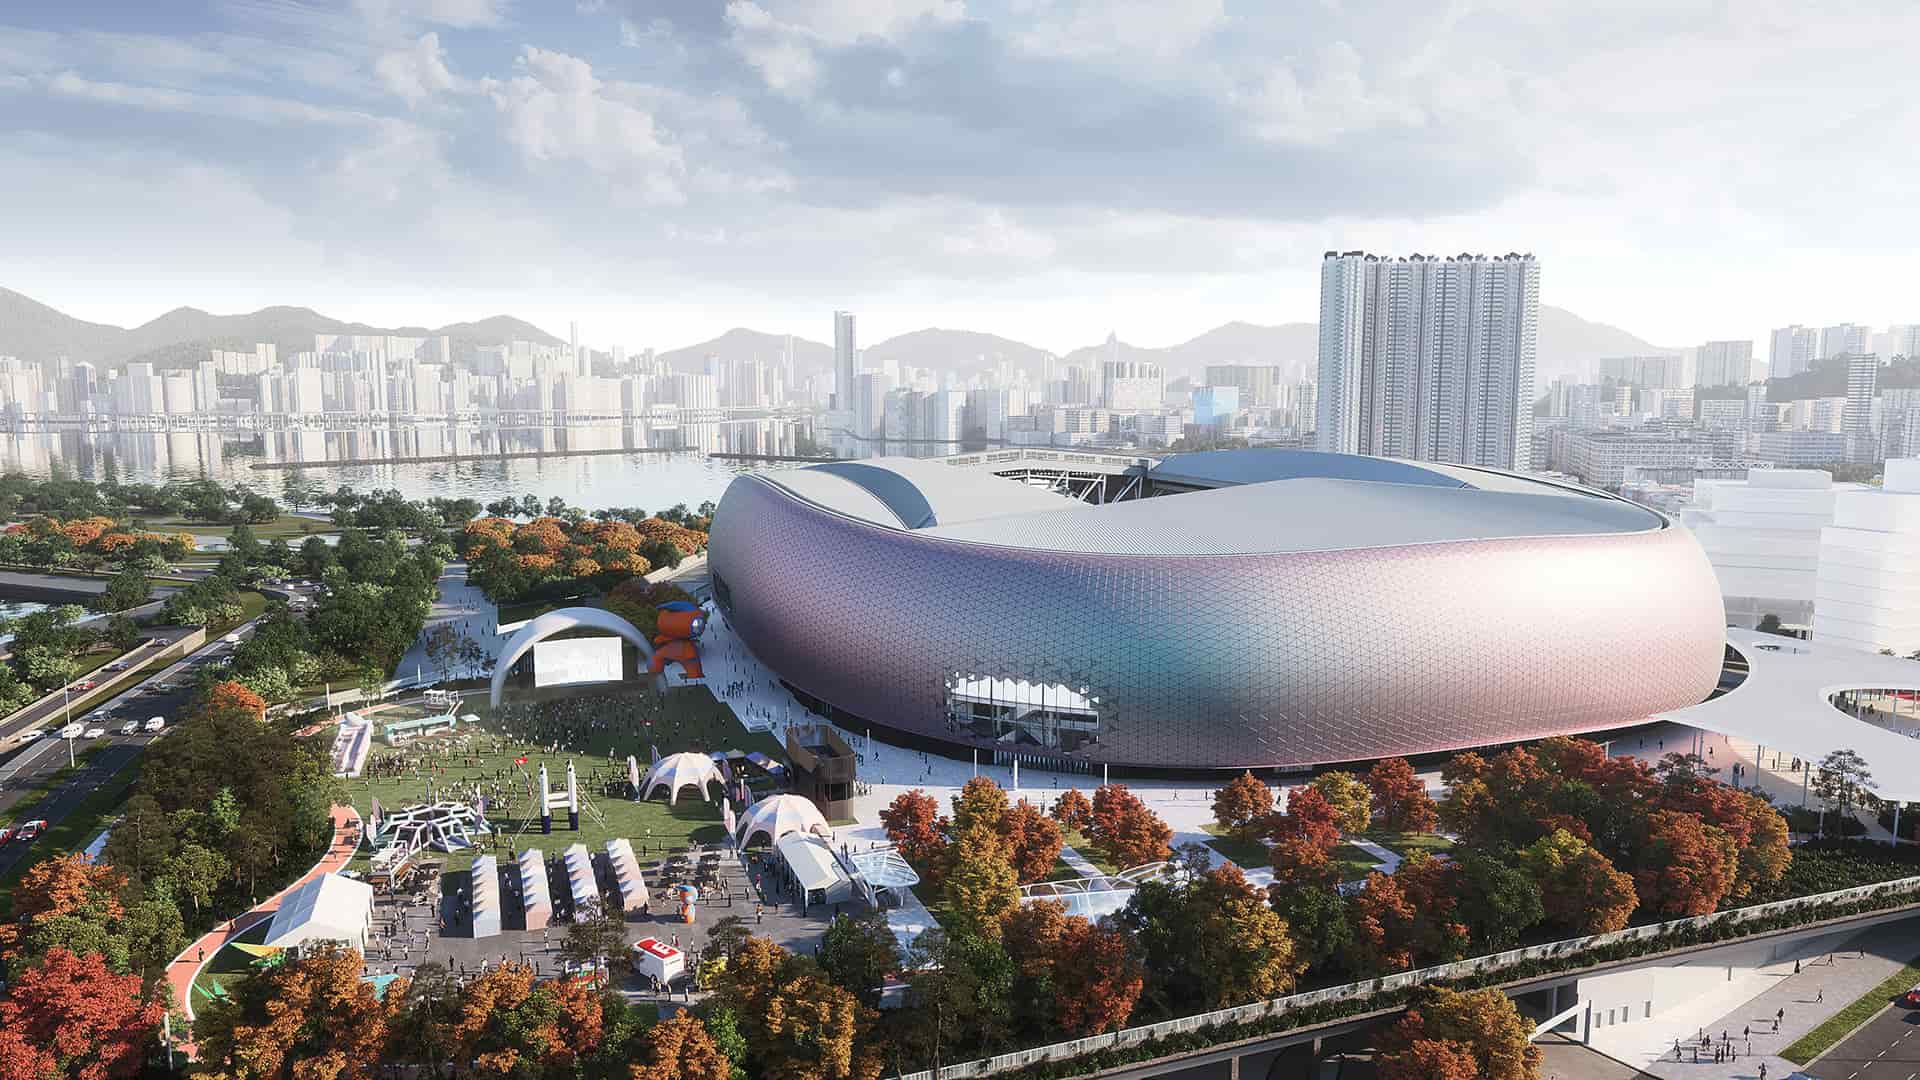 An architectural visualisation of Kai Tak Sports Park in Hong Kong